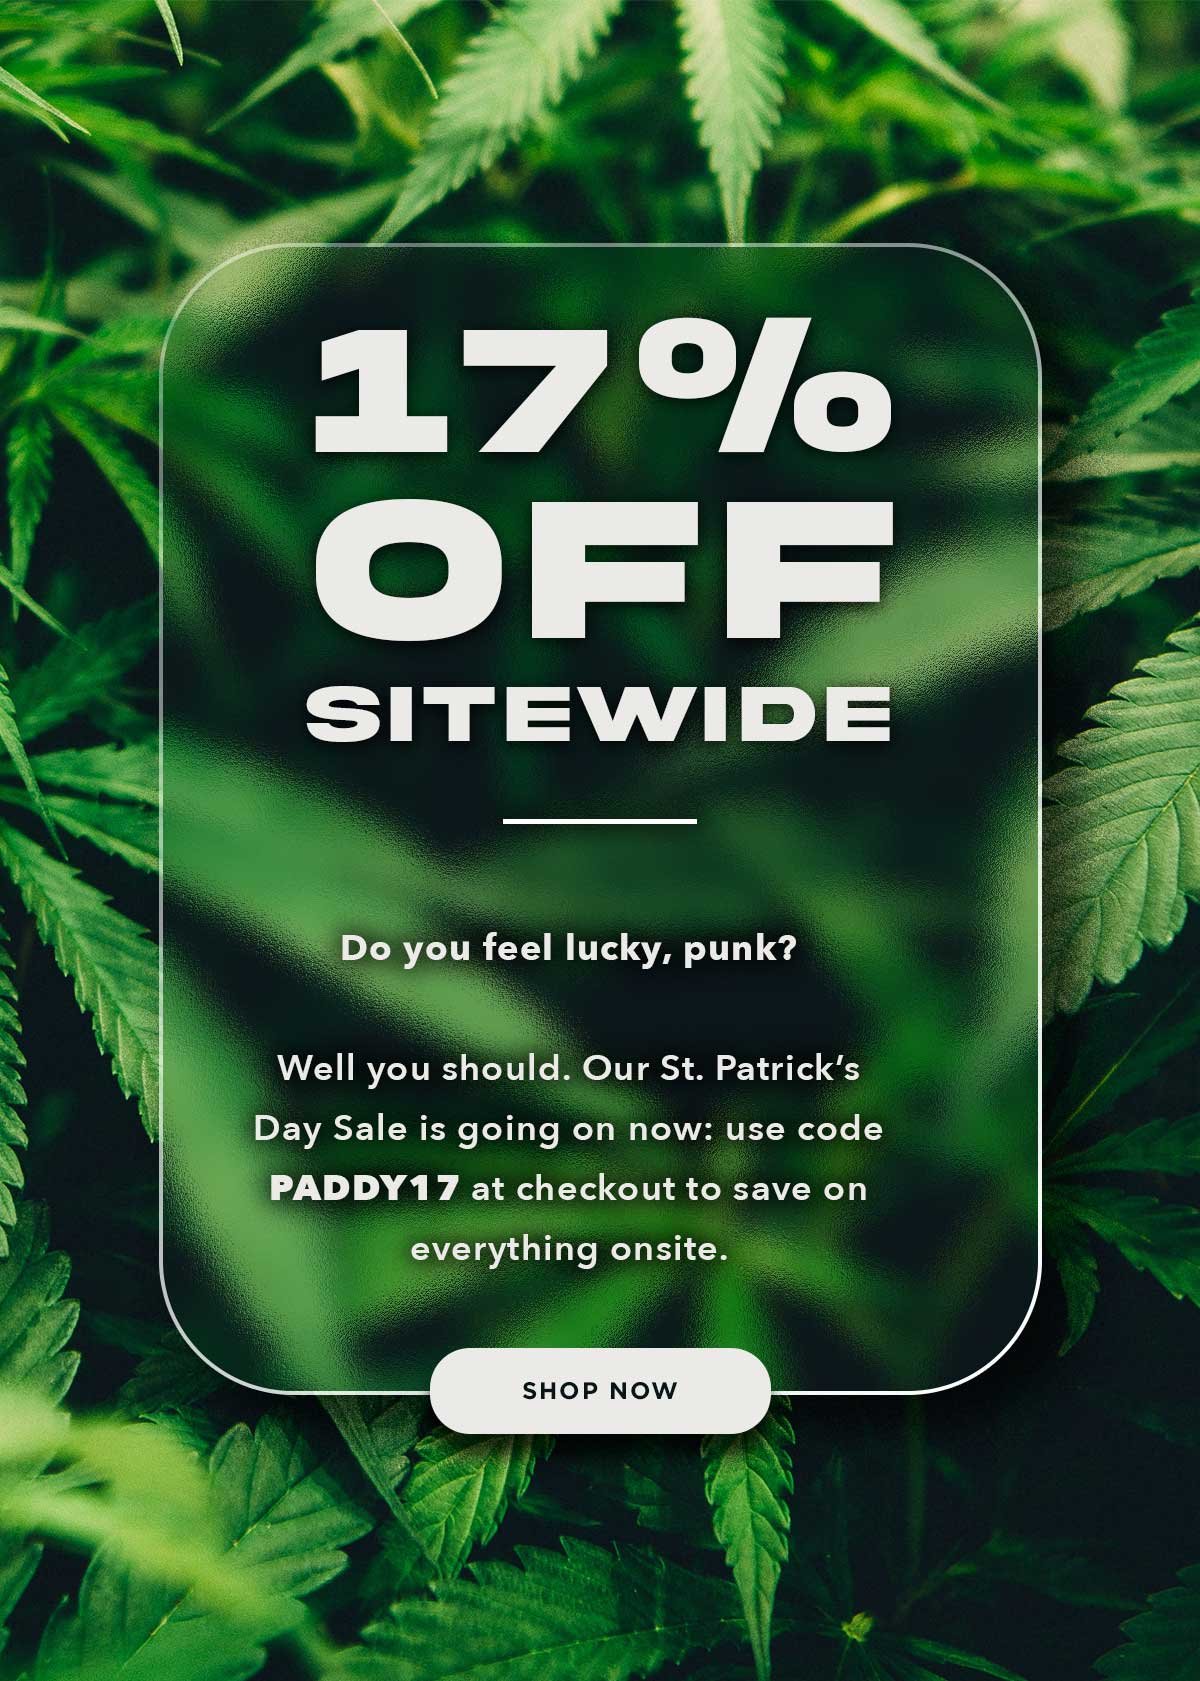 St. Patrick's Day Sale: 17% Off Sitewide with code PADDY17